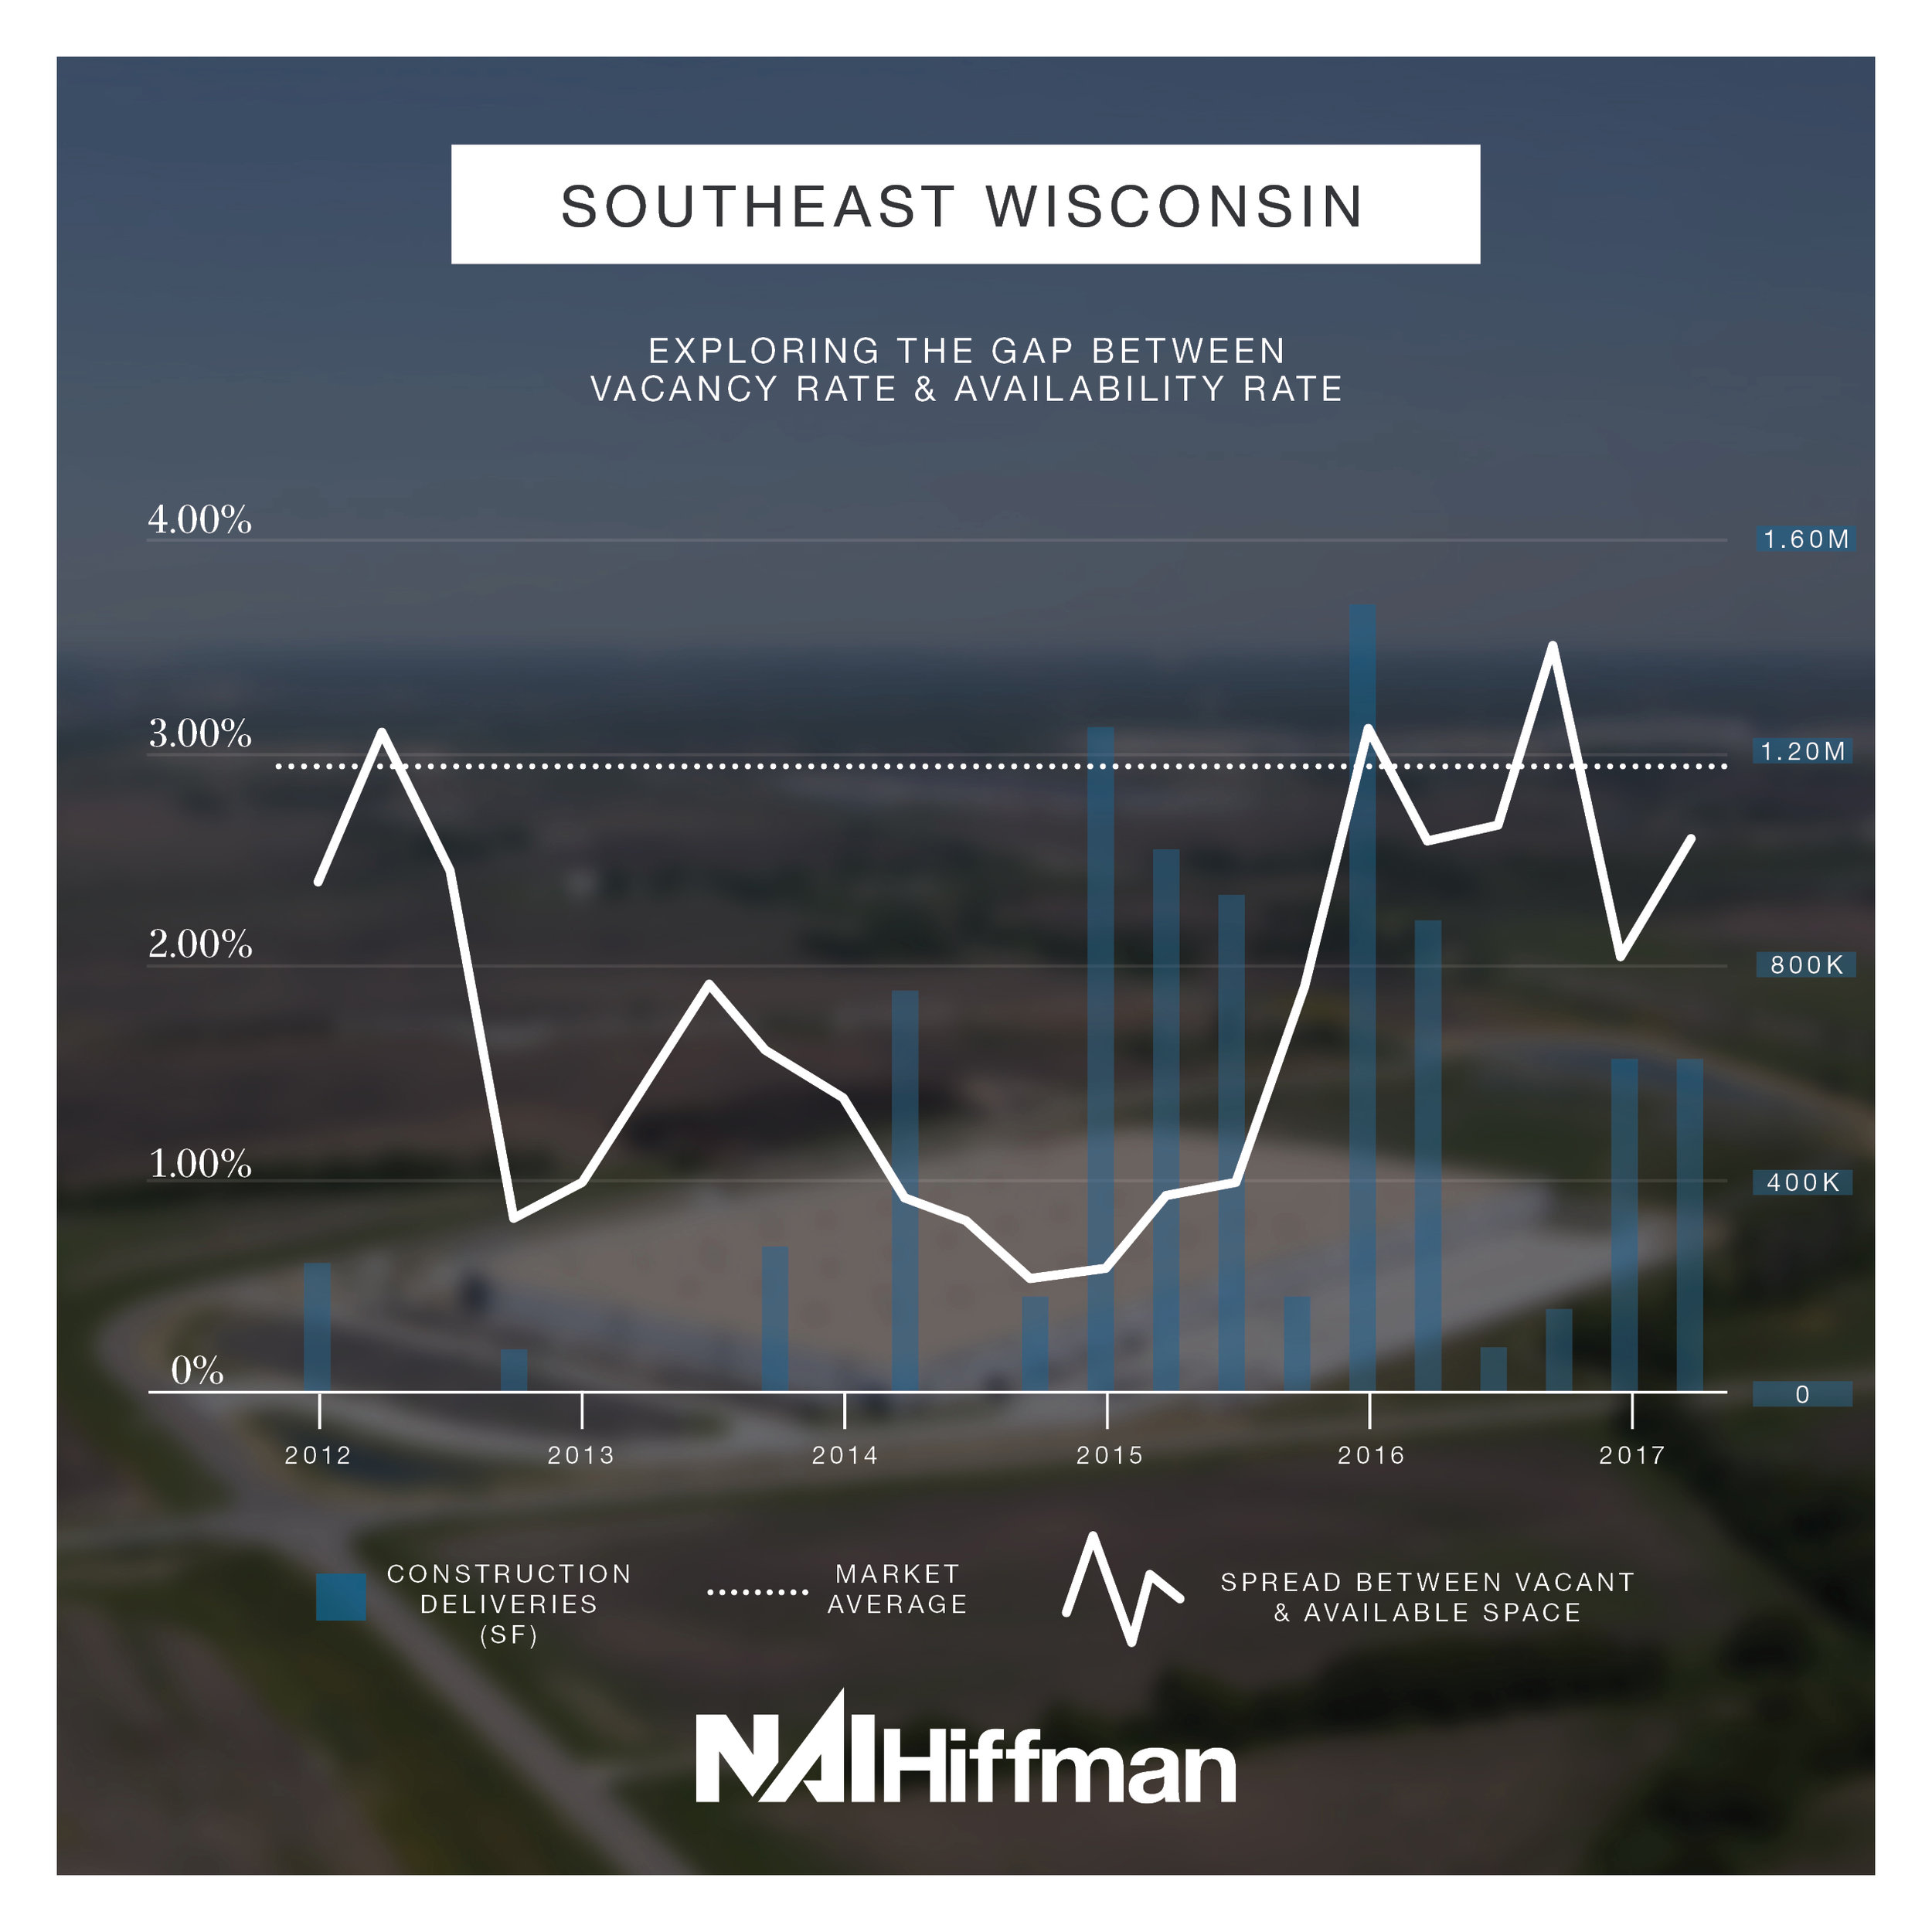   Southeast Wisconsin  – Demand began to outpace supply in mid-2012 and developers realized the need for new construction. Deliveries picked up in 2015-2016 and, since the drastic drop, the spread has hovered near the market average for the past 18 months. 